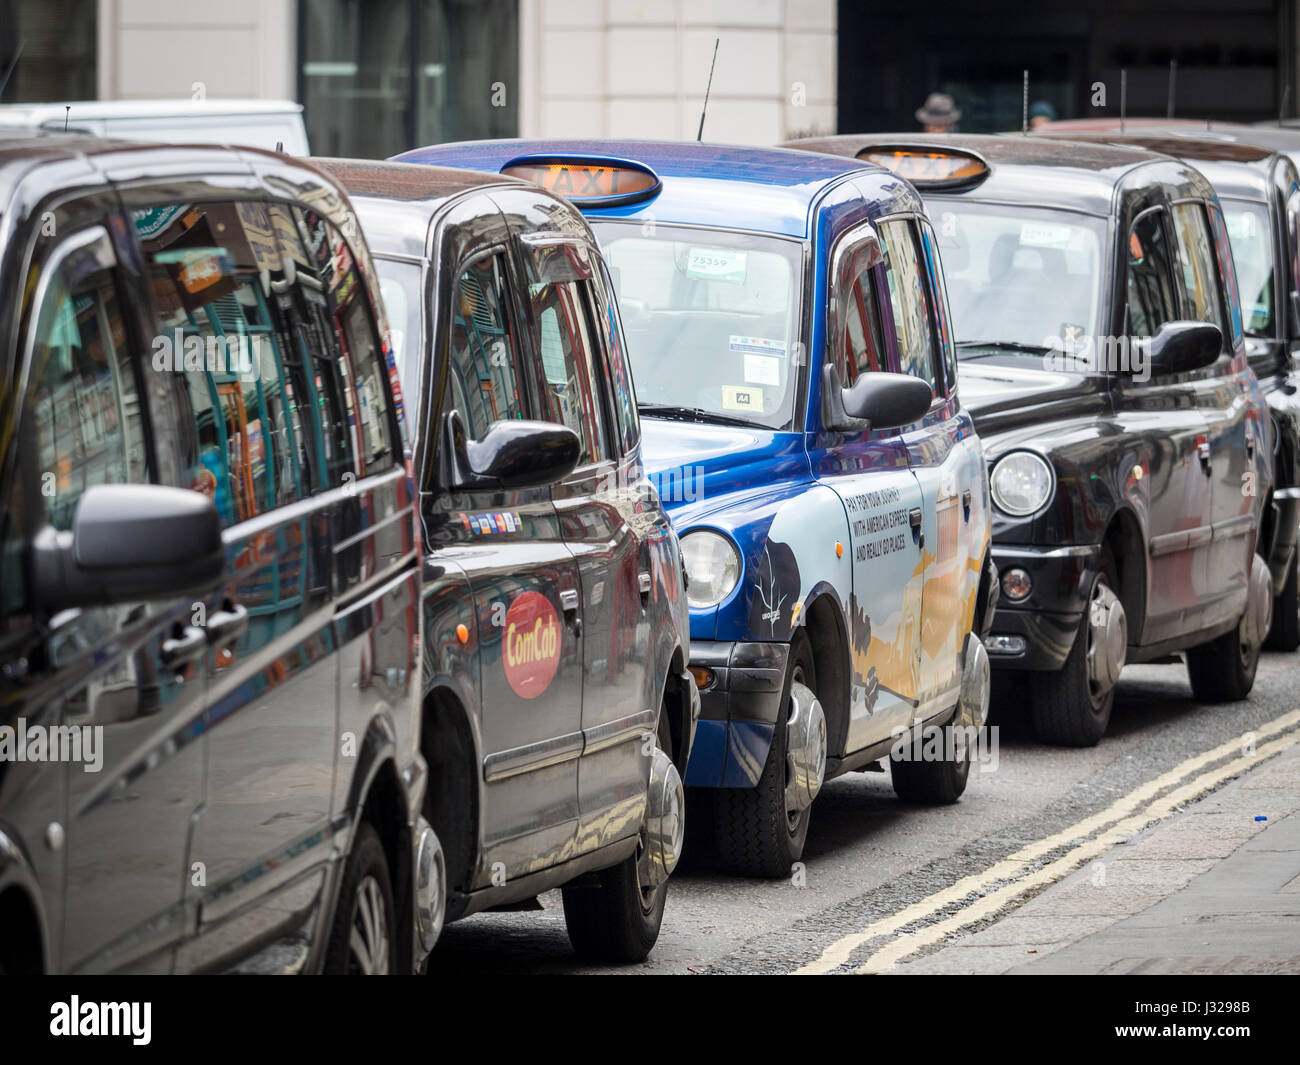 A queue of London Taxis waiting to pick up passengers near Liverpool Street Train Station in Central London Stock Photo